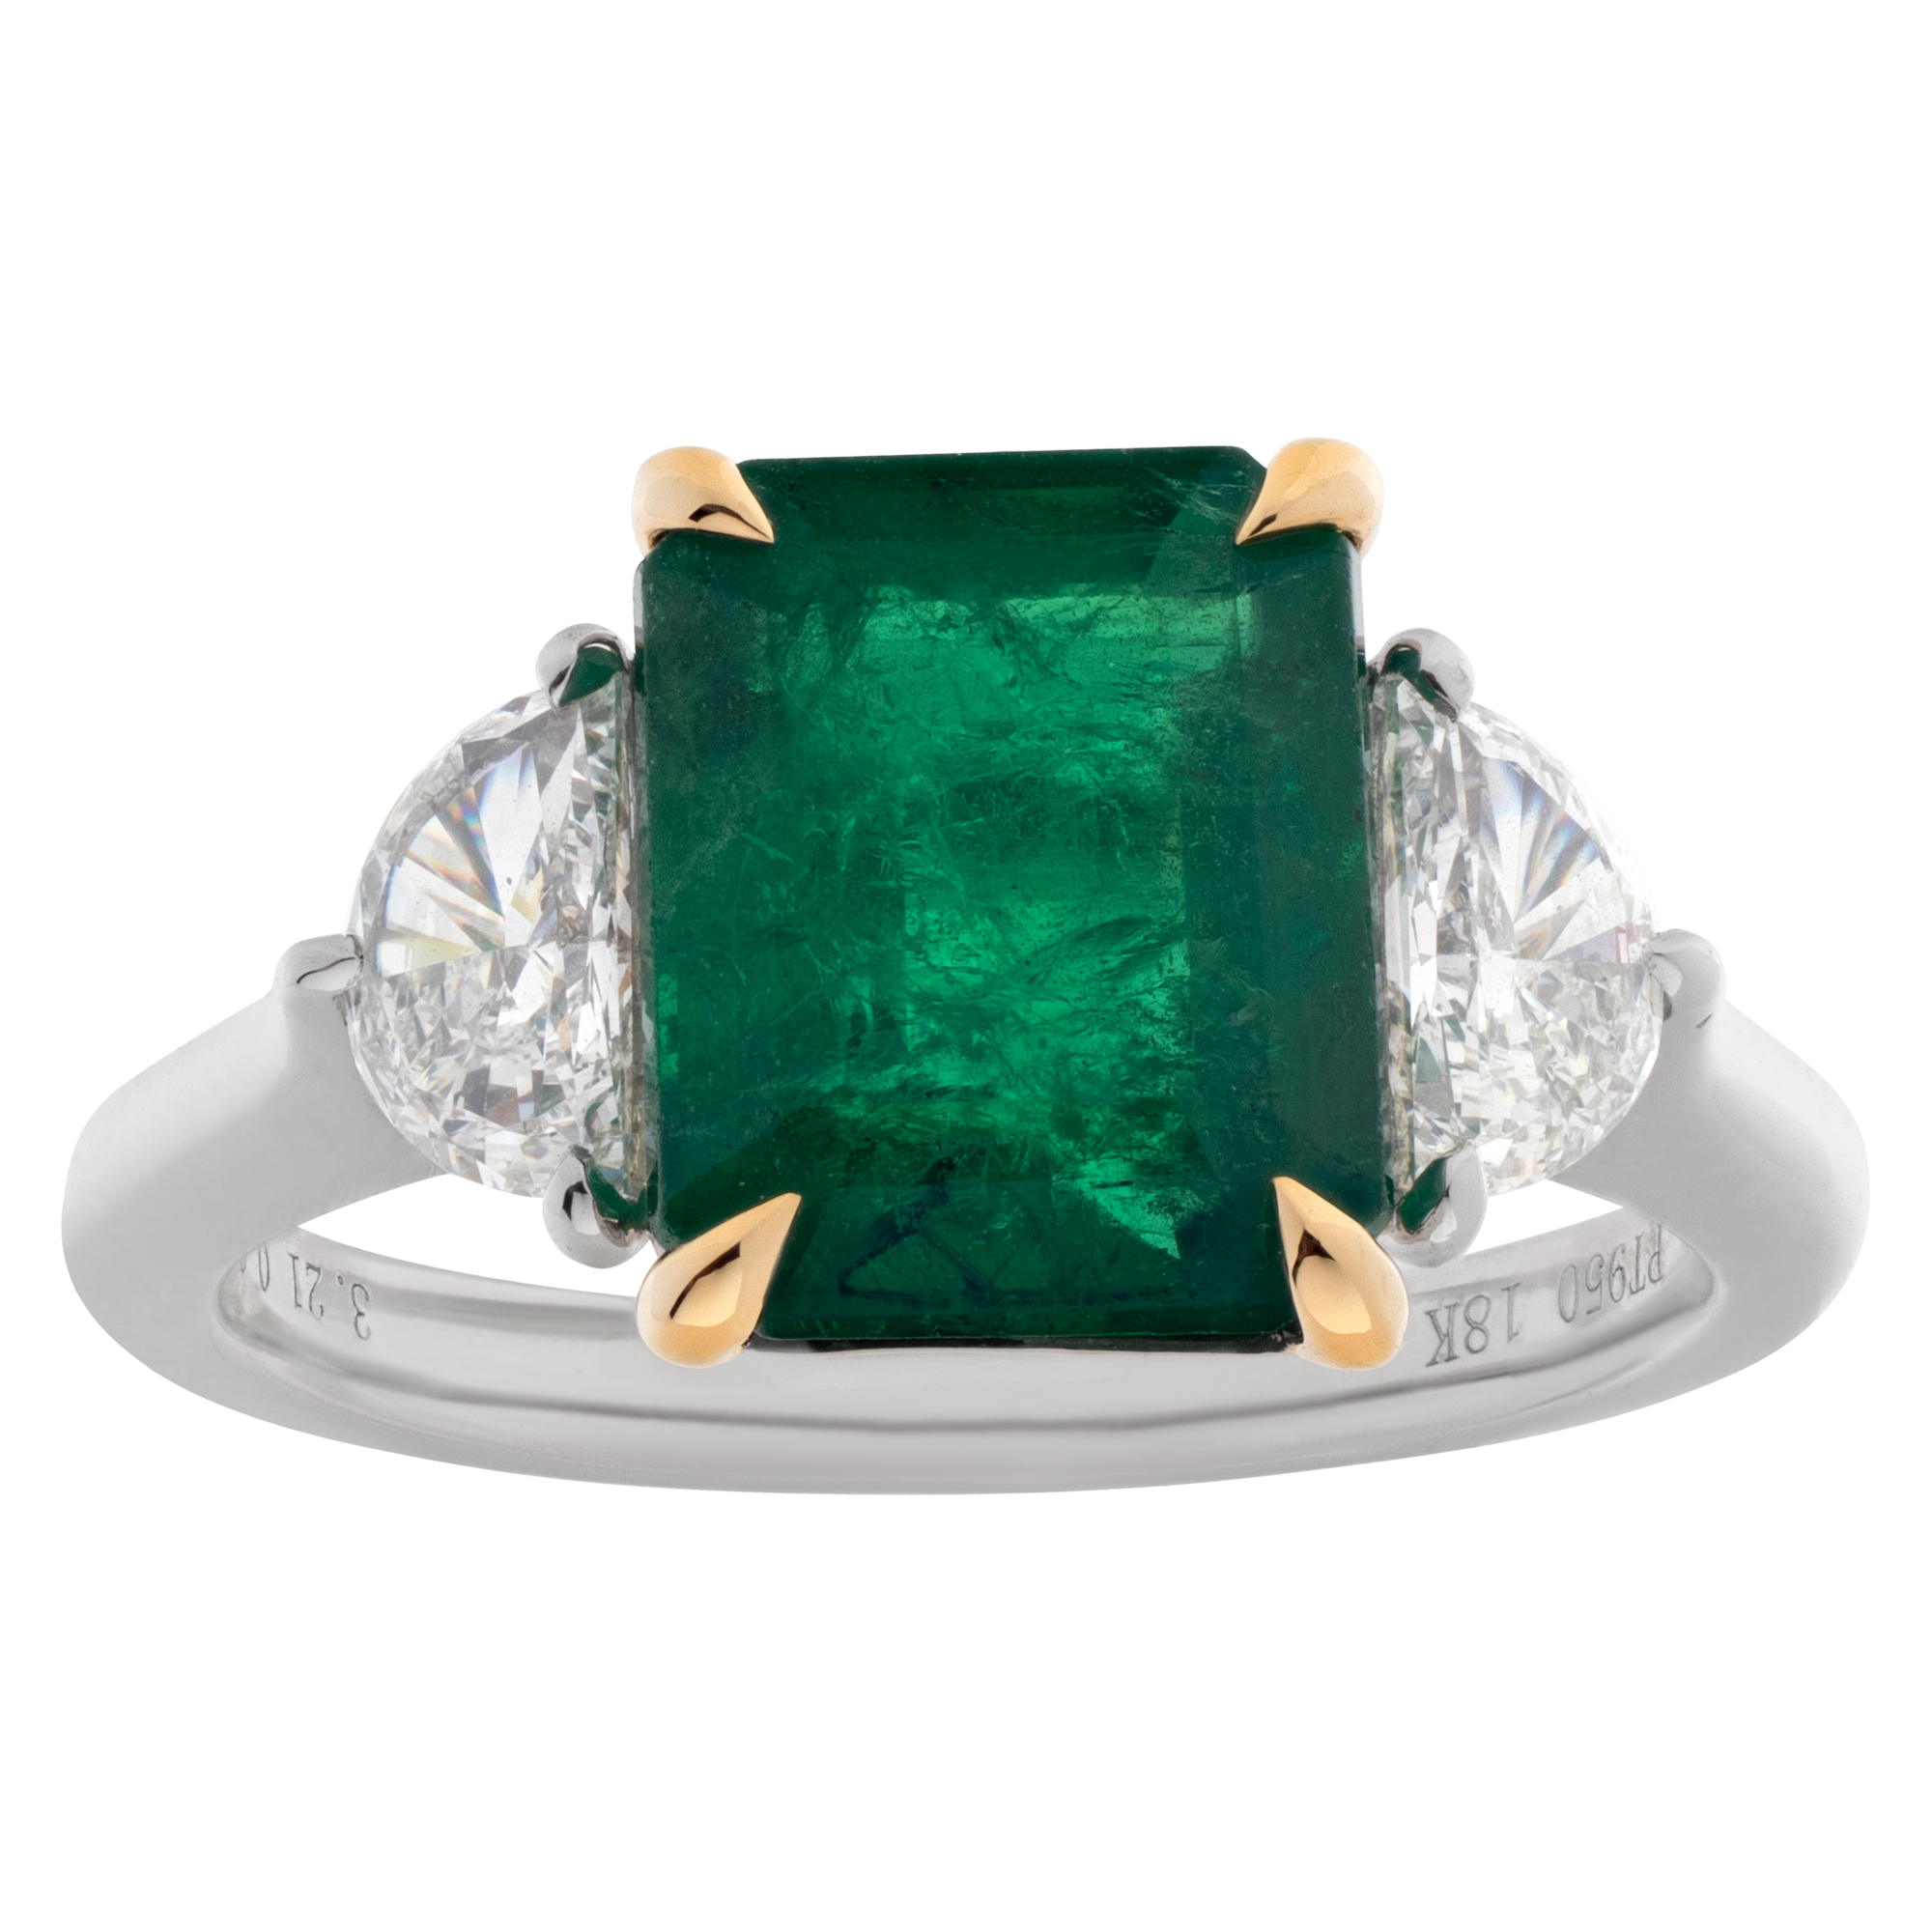 Emerald ring with diamond accents set in Platinum